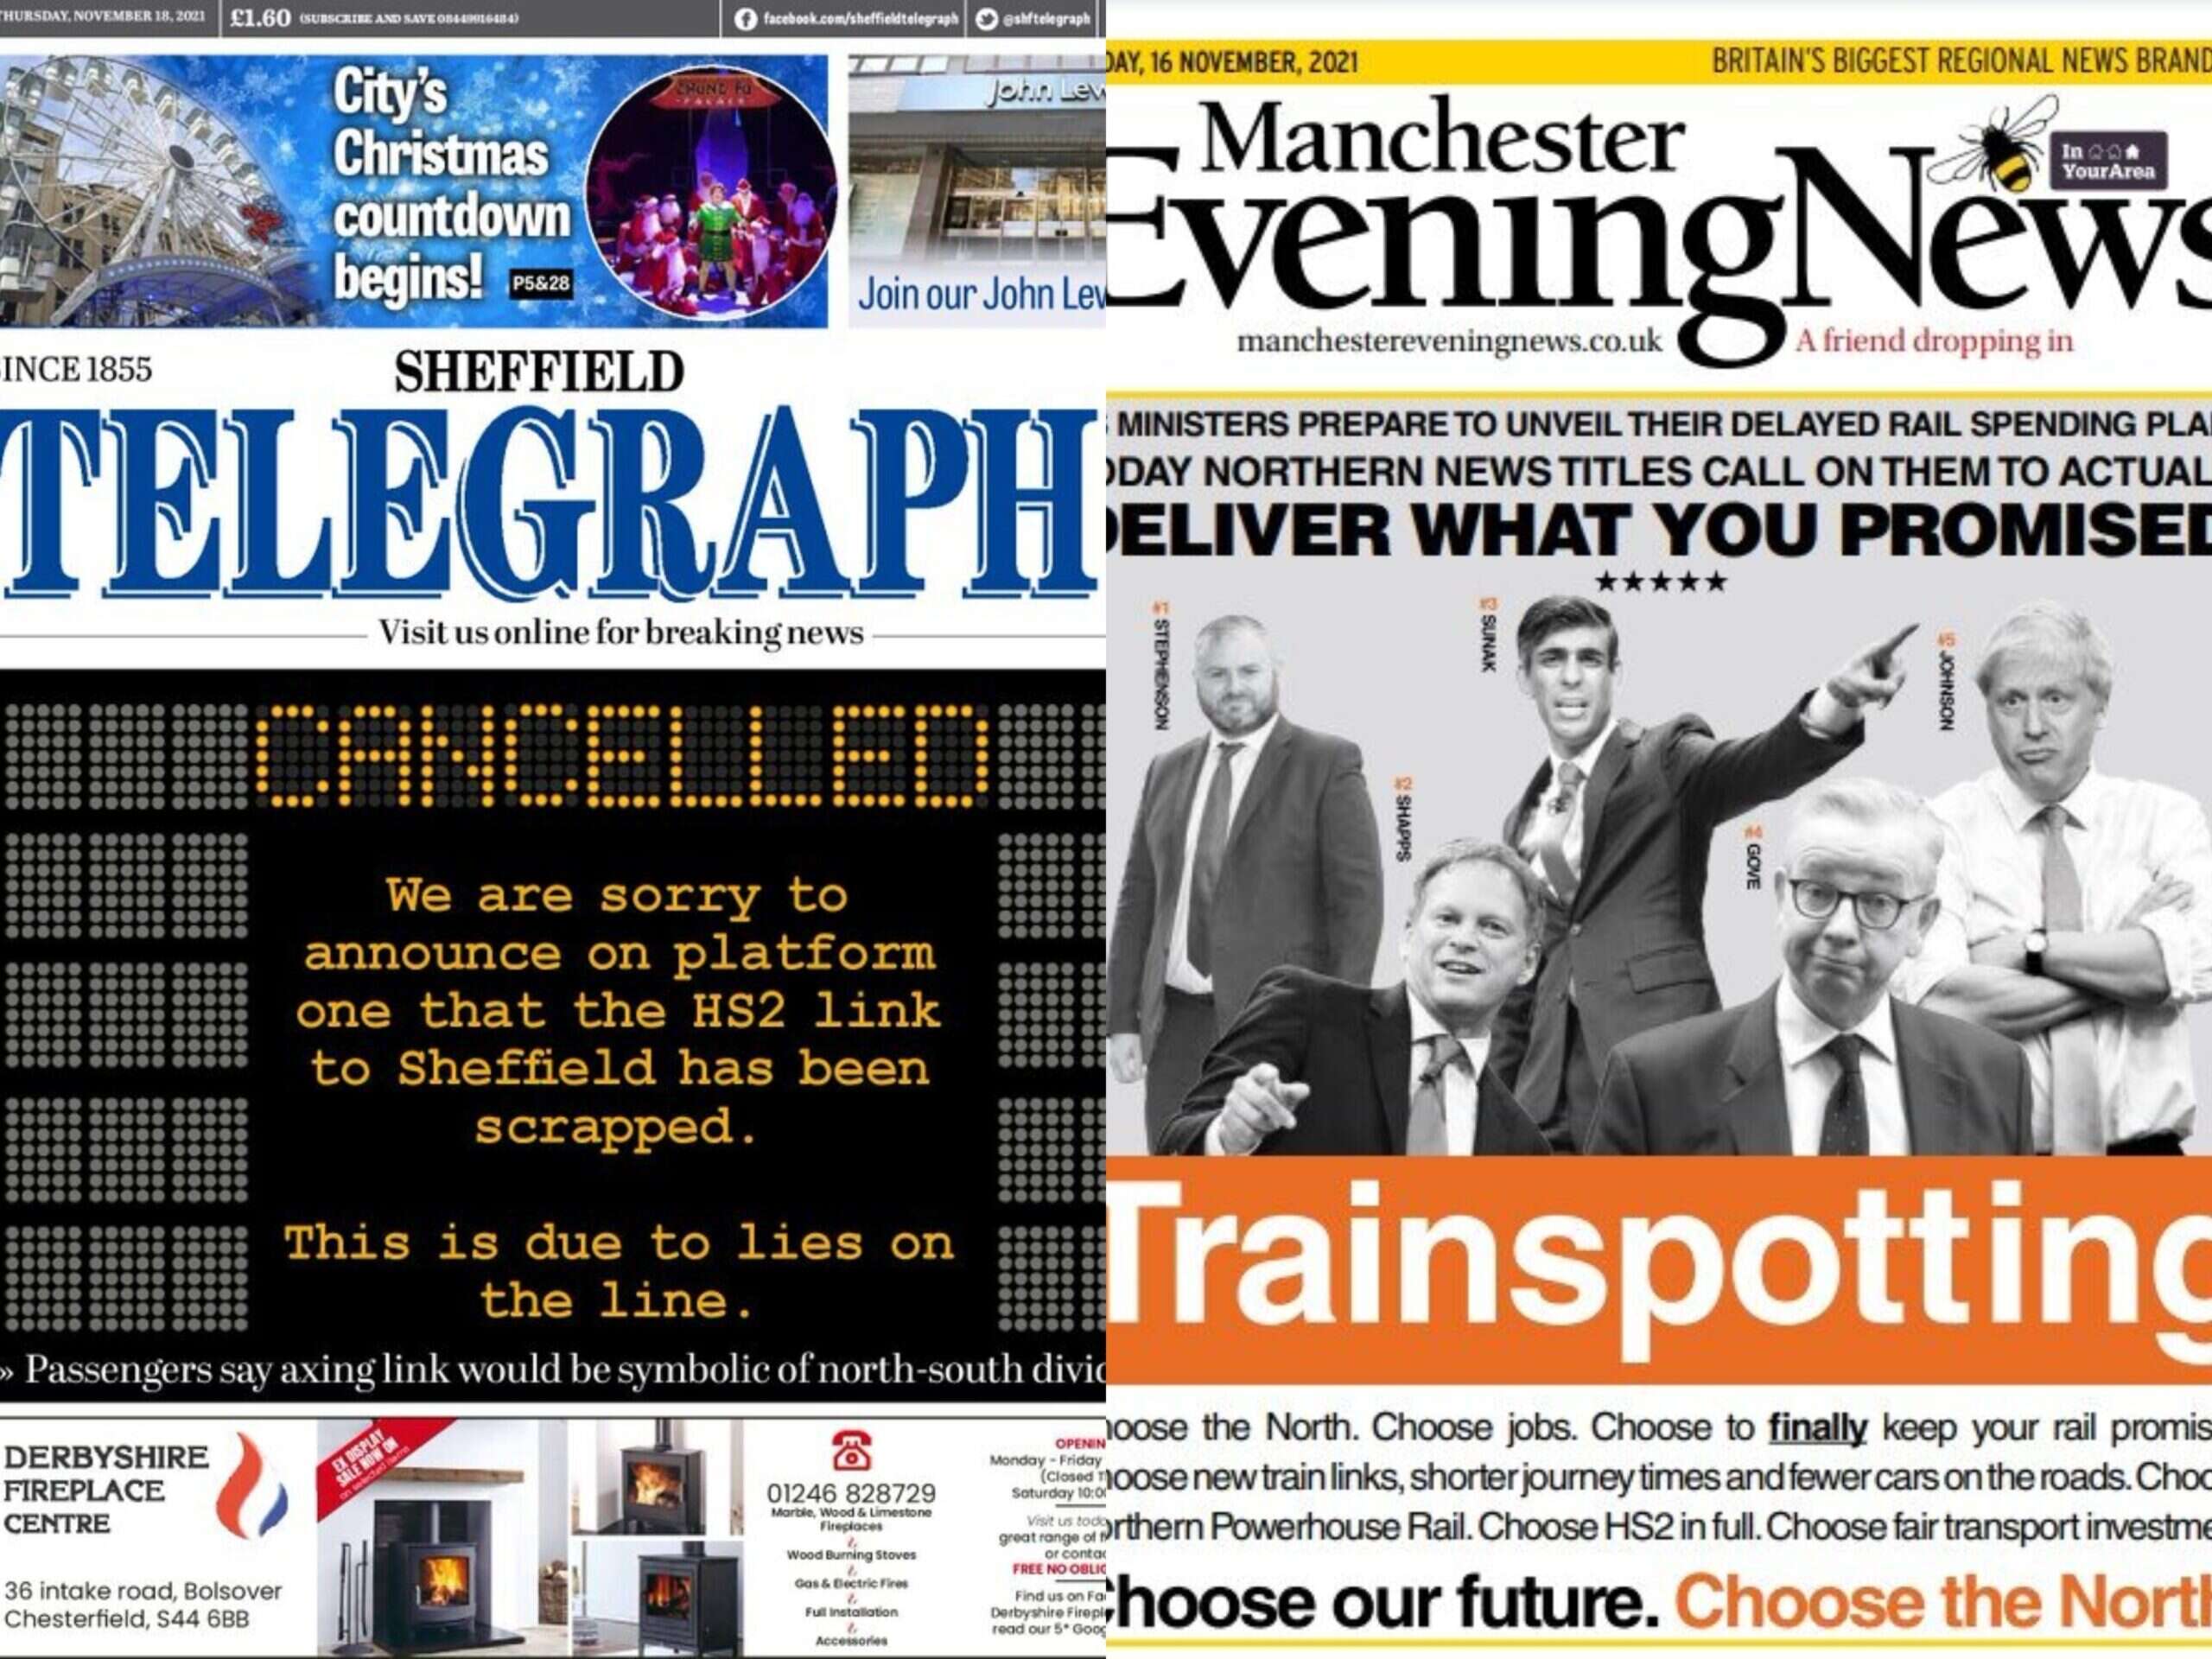 How North's newspapers harnessed front page power to signal HS2 outrage